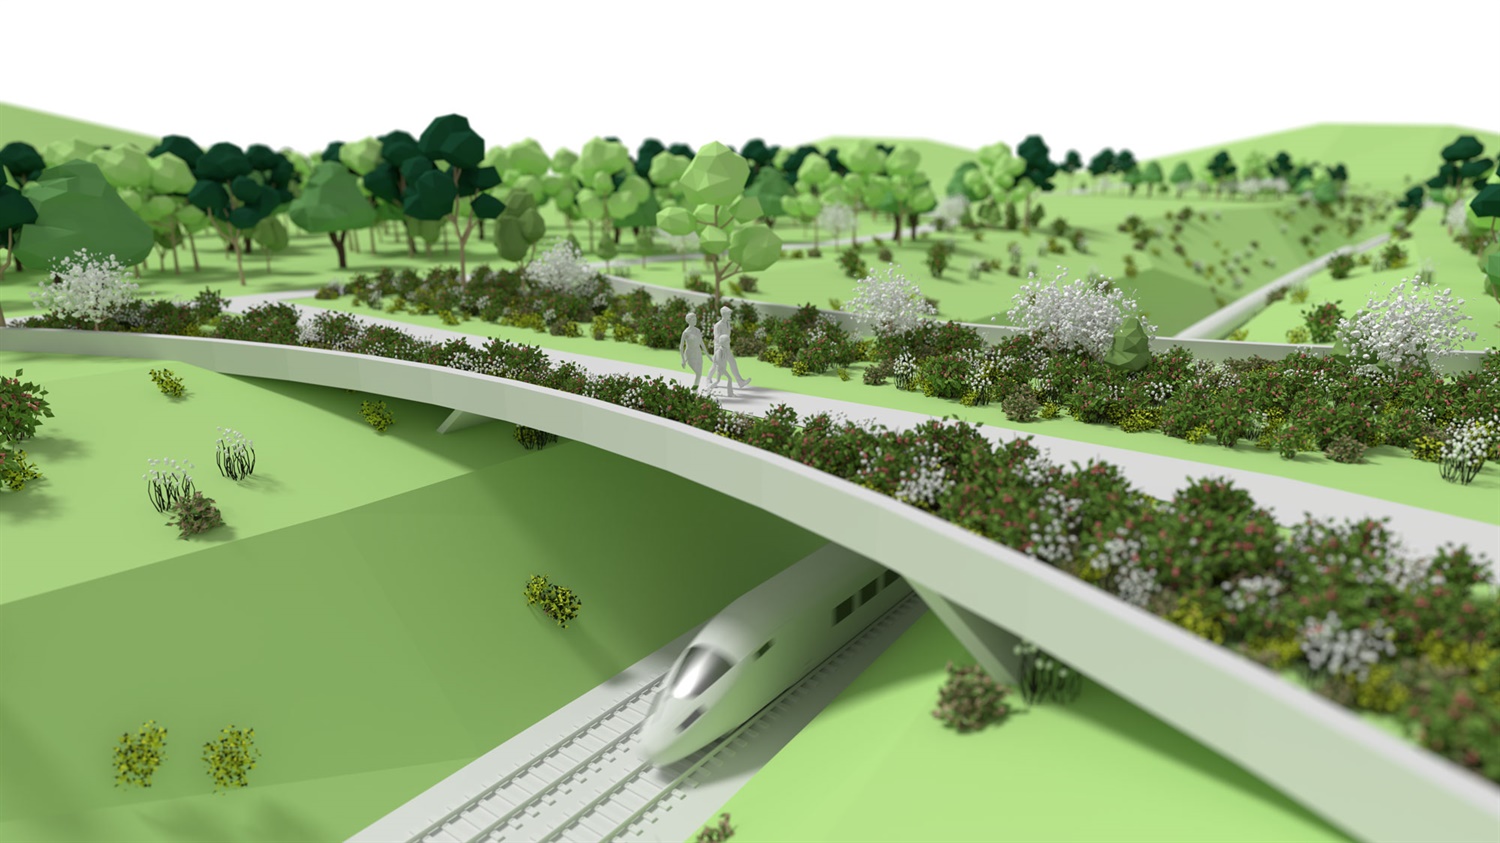 ‘Green corridor’ on the way as HS2 looks to revitalise local environments